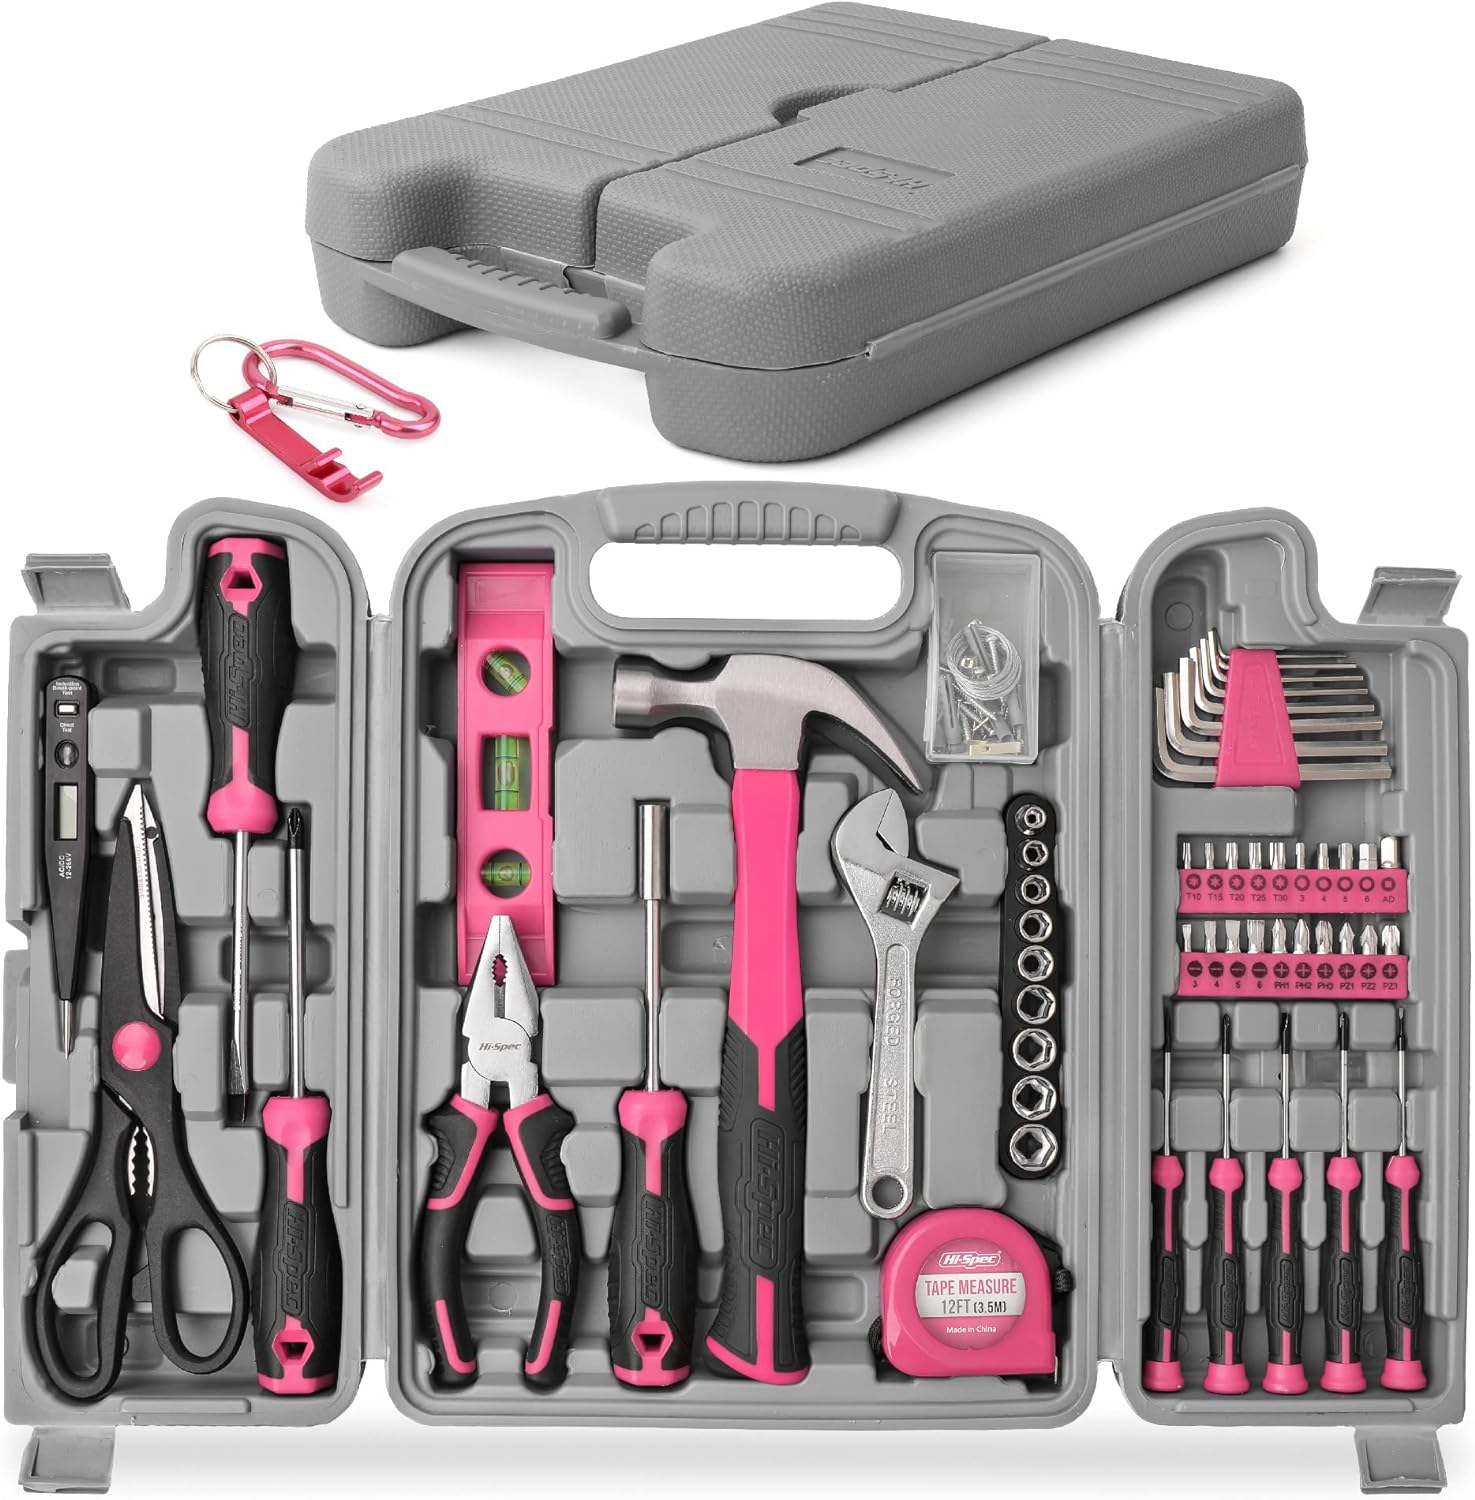 Hi-Spec Products Hi-Spec 56pc Pink Home Tool Kit for Women. Essential Hand Tools for DIY Repairs Complete in a Tool Set Box